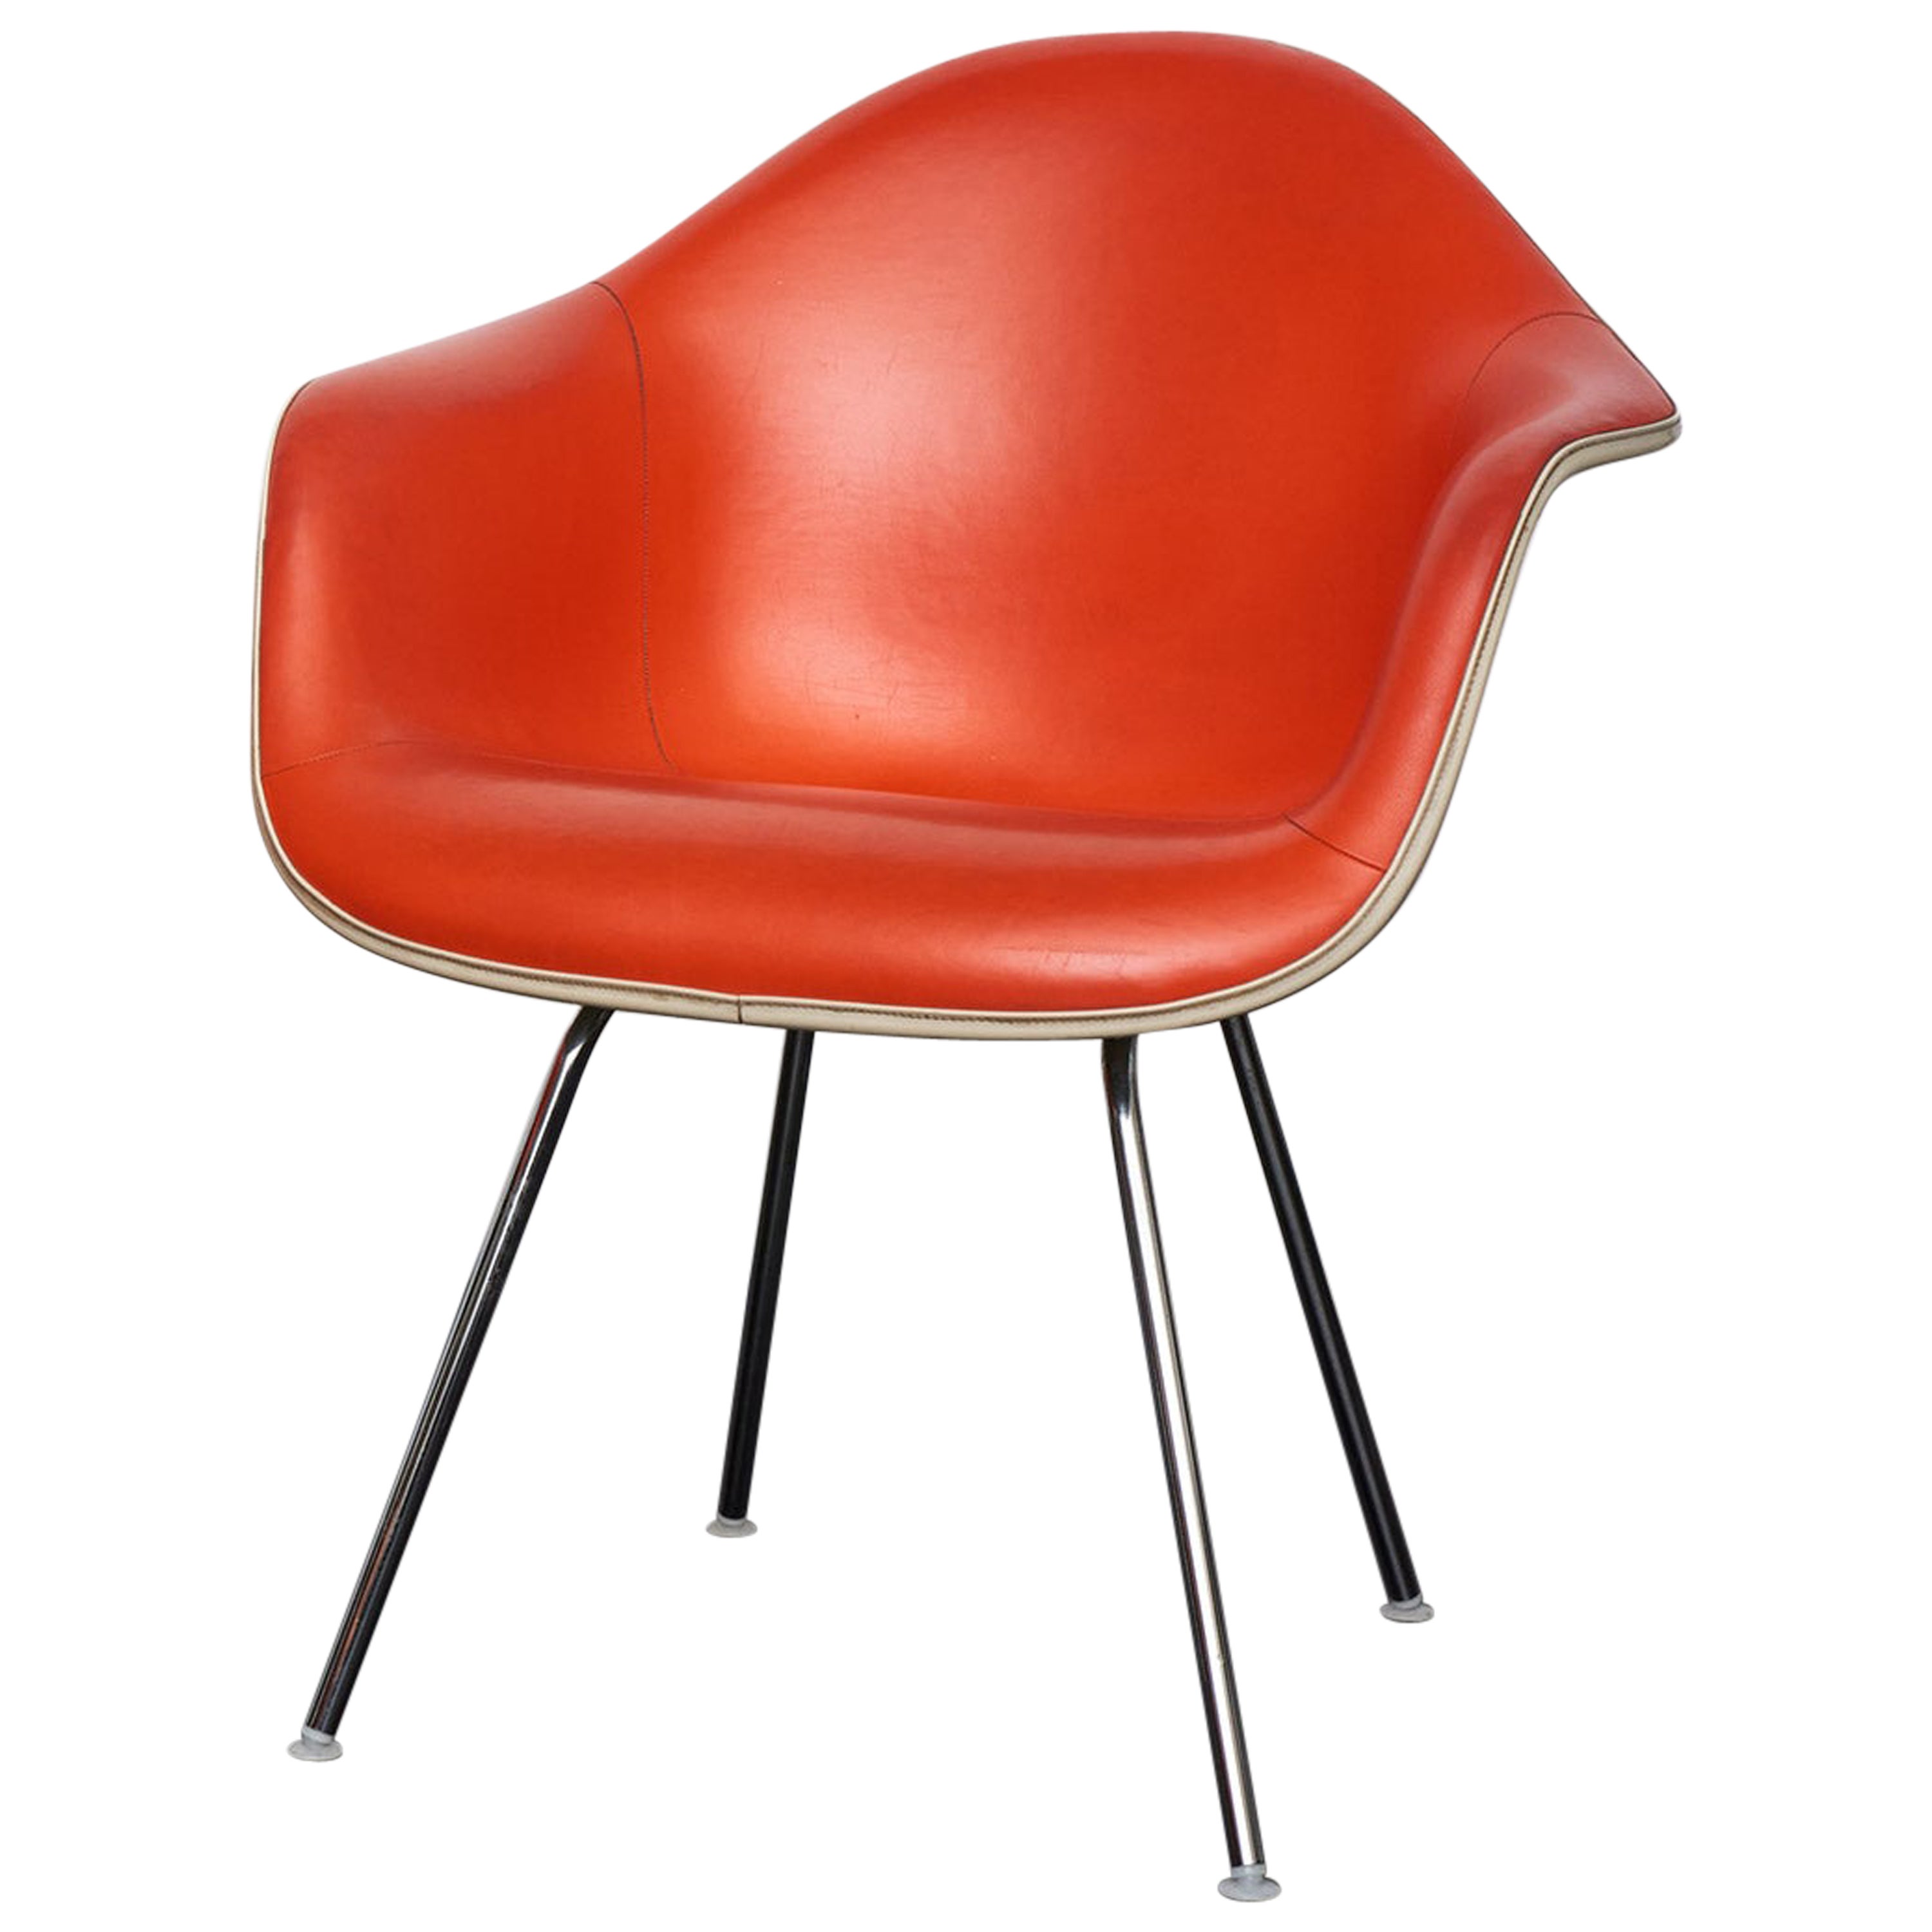 Charles and Ray Eames DAX chair by Herman Miller, 70s For Sale